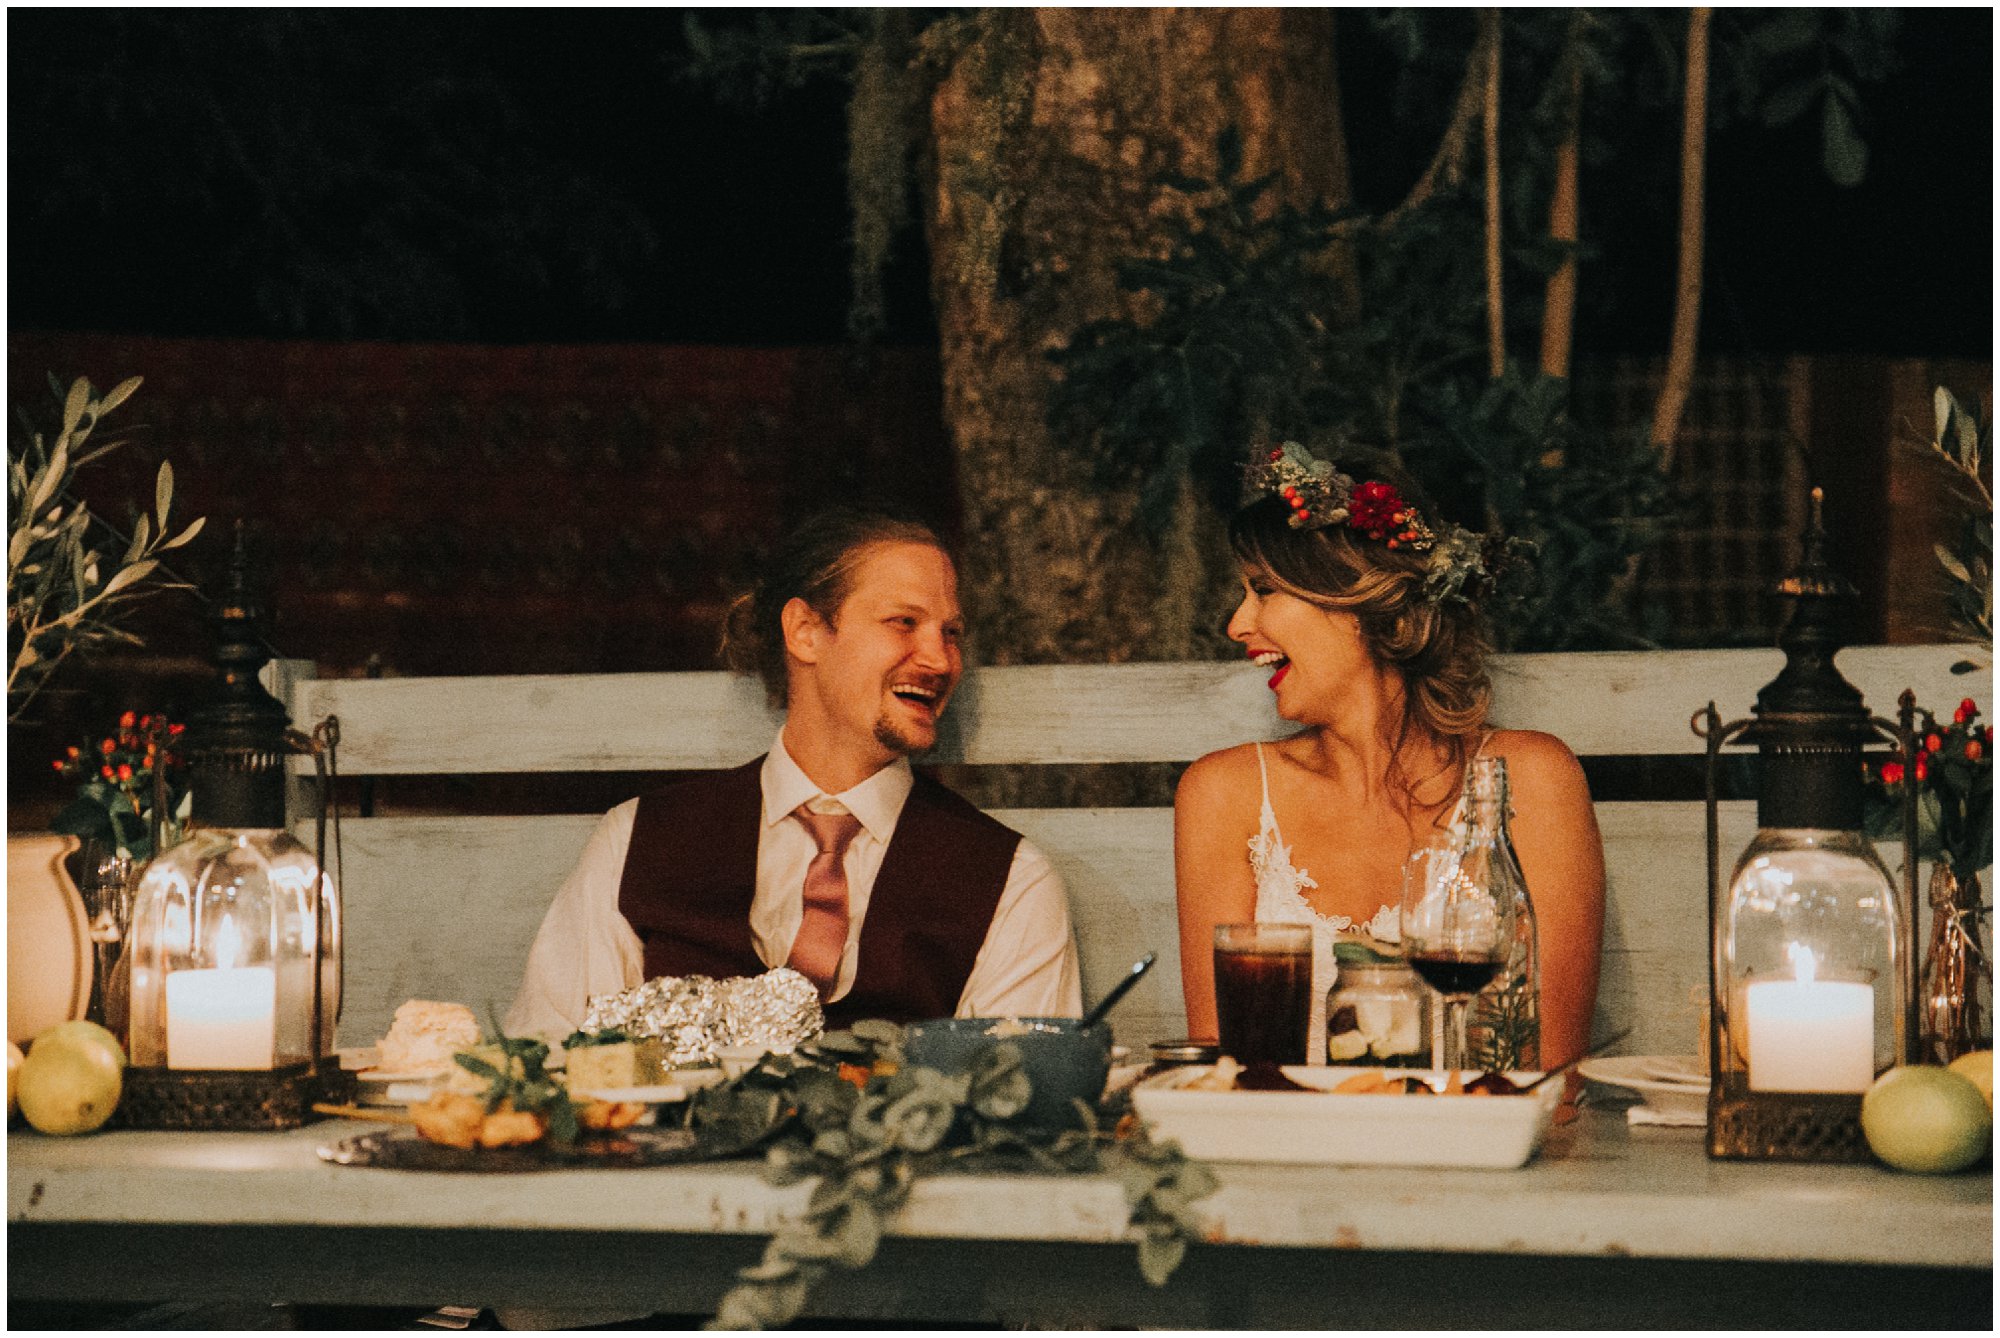 Outdoor Bohemian Destination Wedding at Francine’s Venue in Hoedspruit Limpopo by Junebug World's Best Photographer Maryke Albertyn Award Winning International Alternative Moody Photography based in Cape Town South Africa